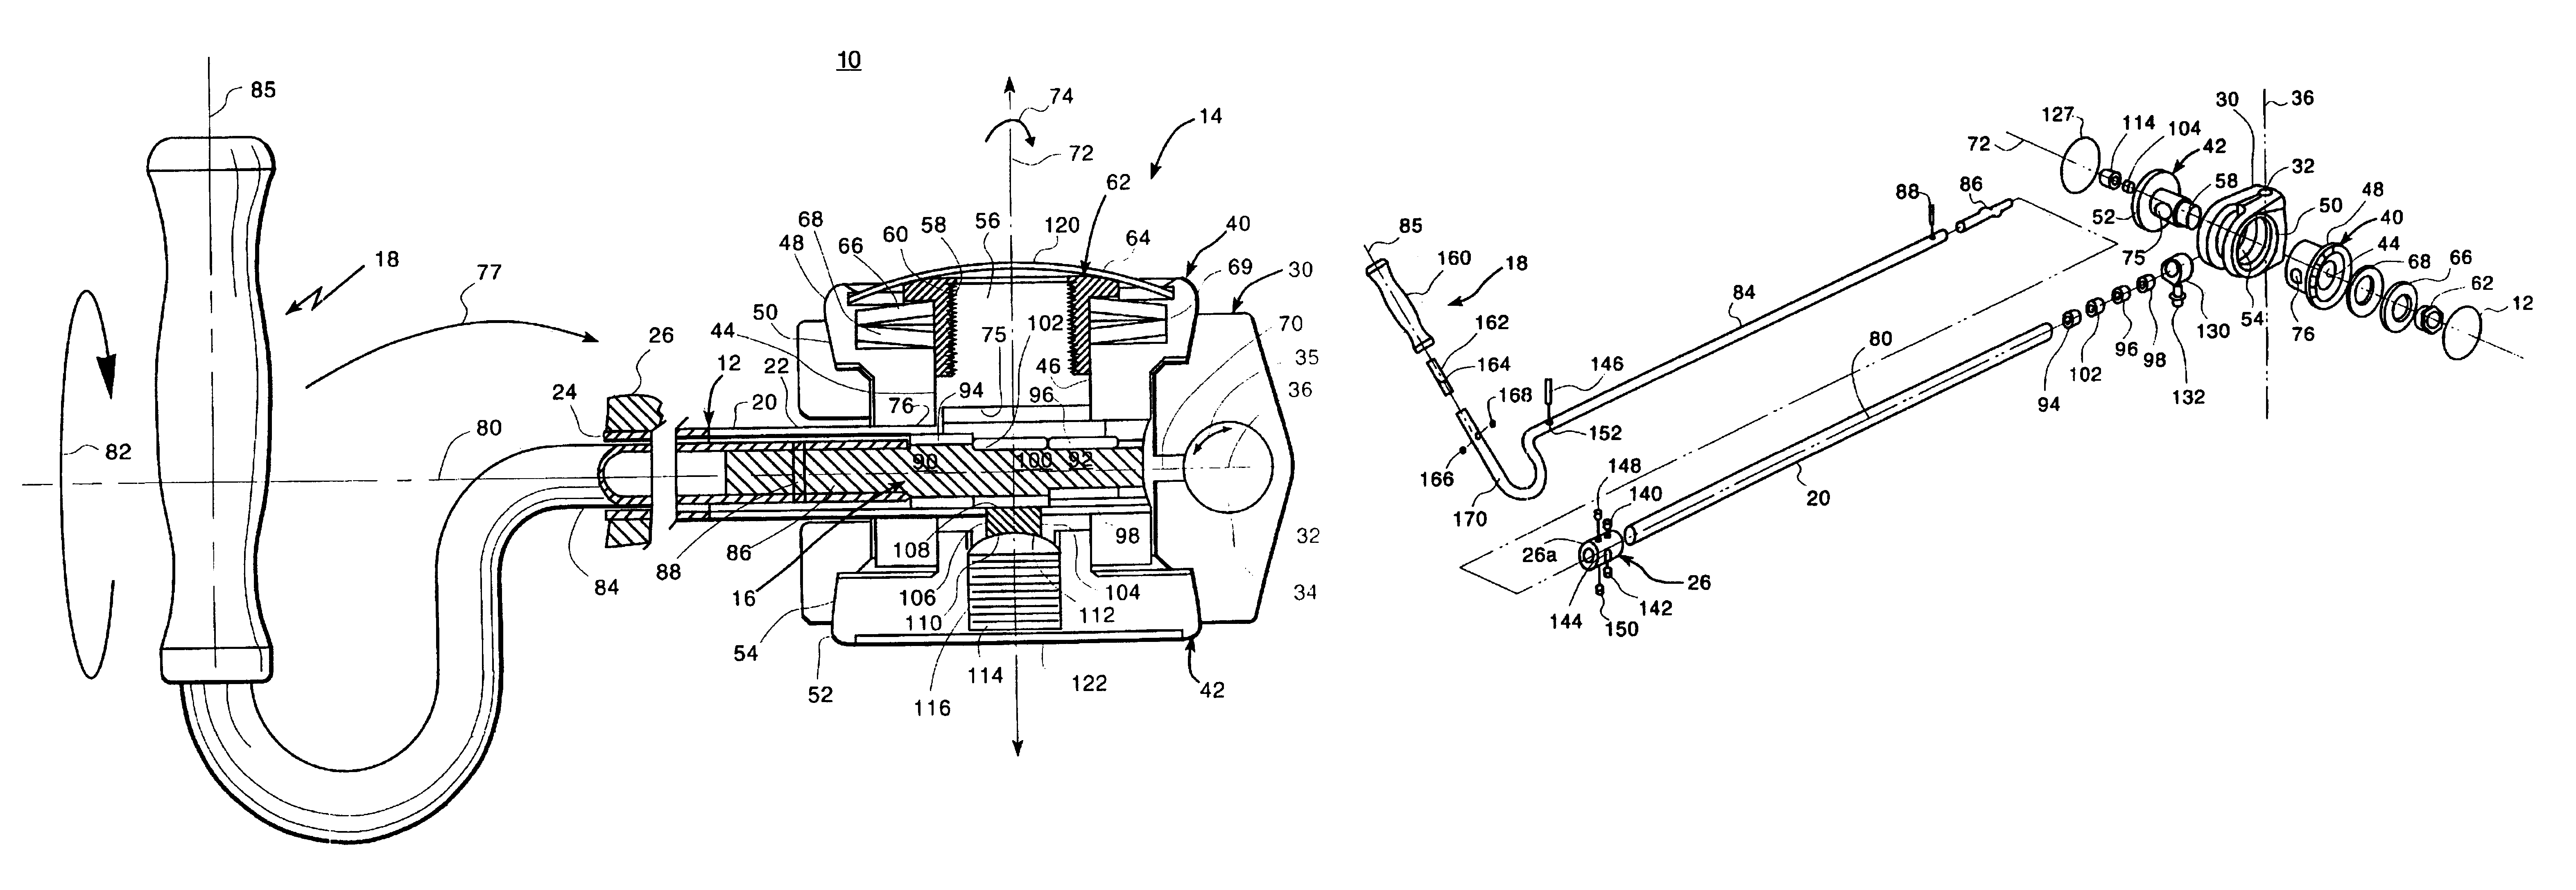 Leg holder system for simultaneous positioning in the abduction and lithotomy dimensions